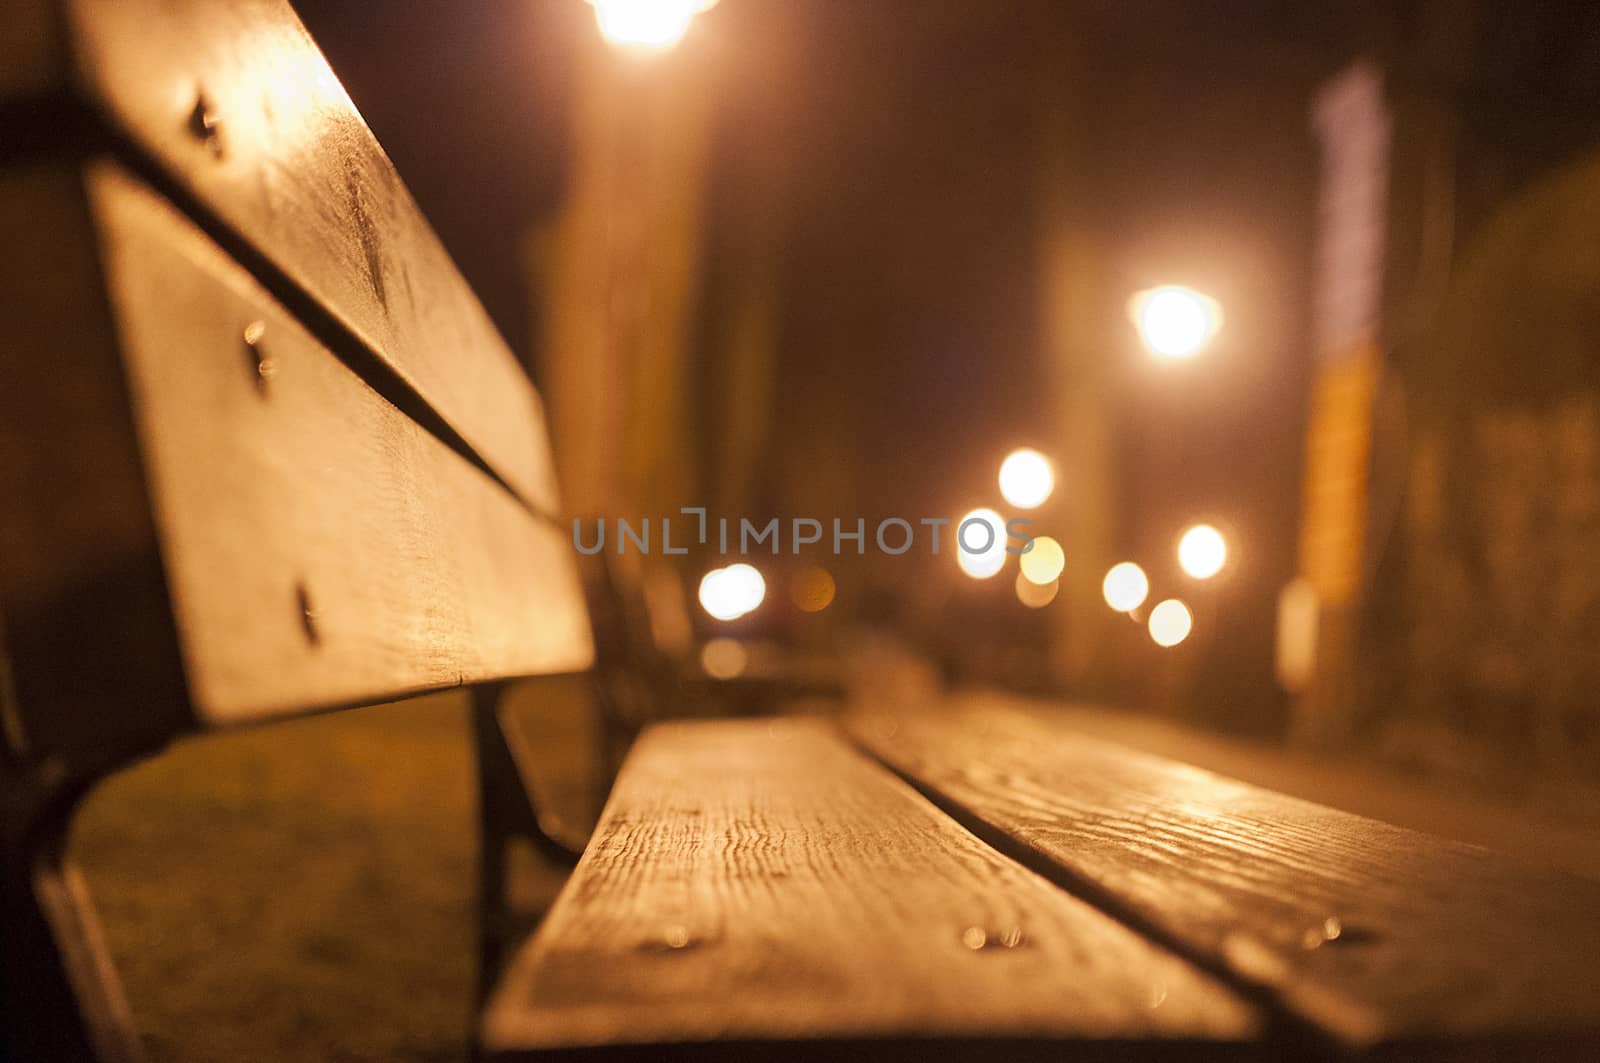 A bench in the park. Blur. Shallow depth of field